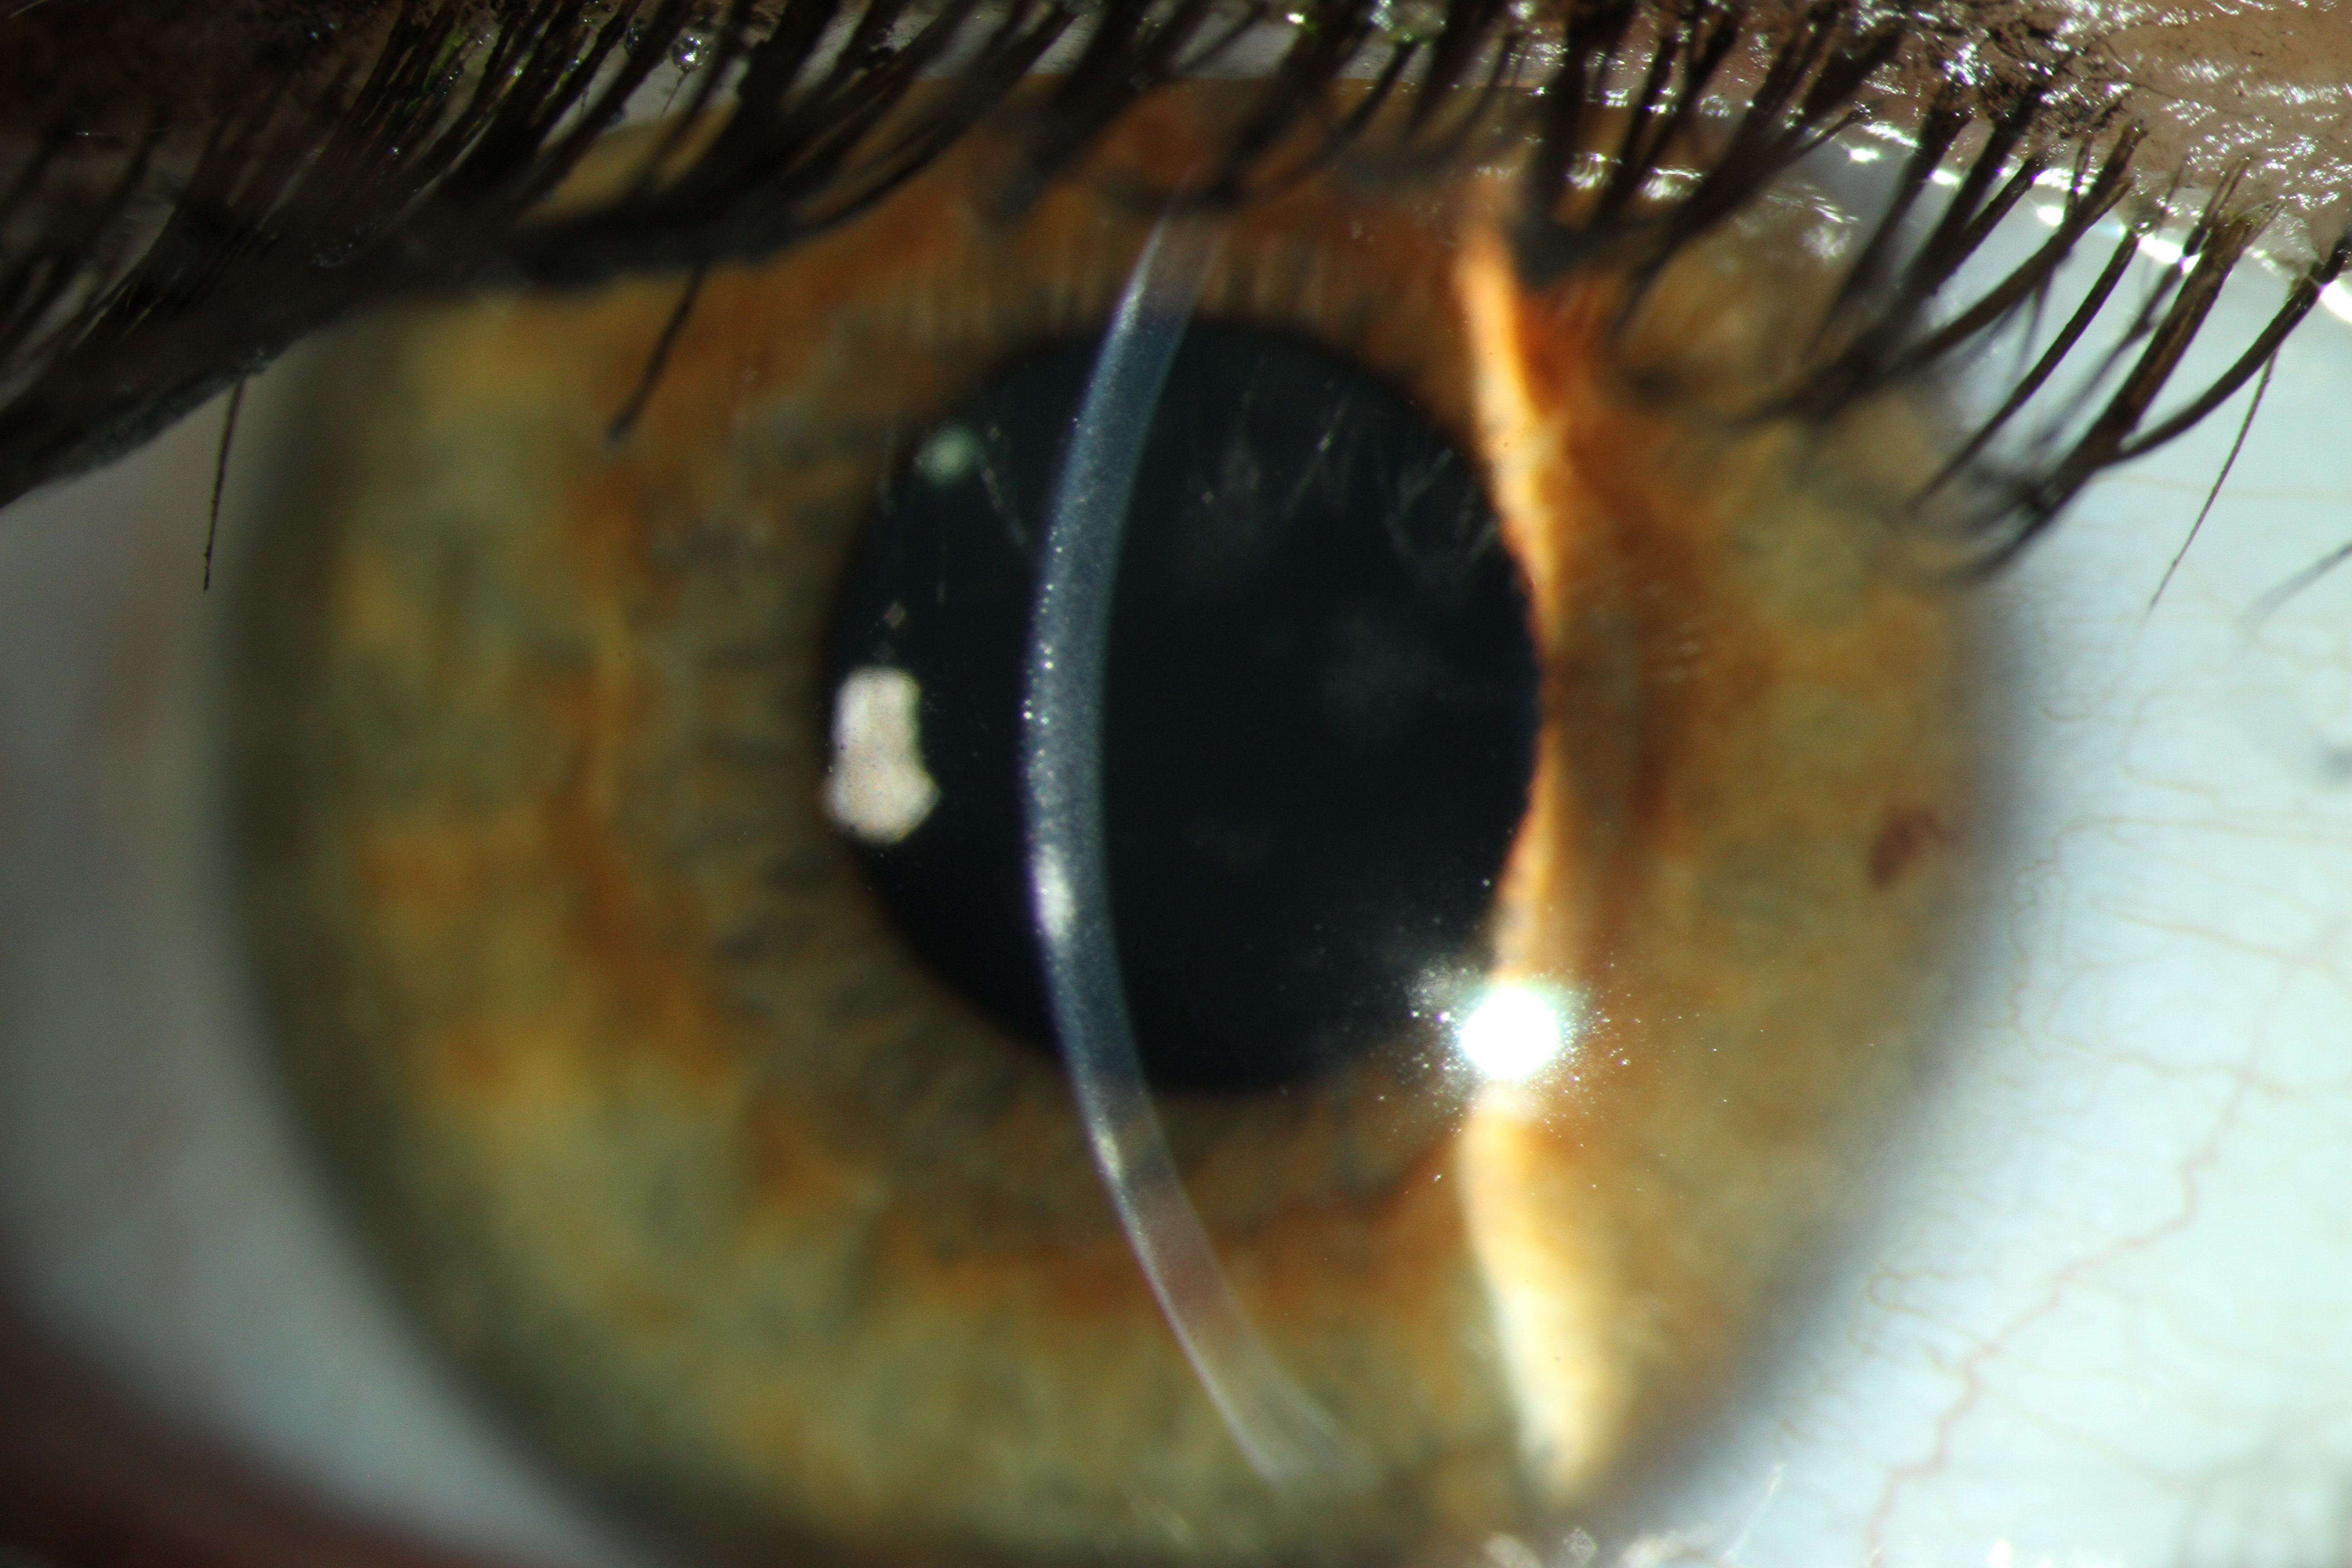 This photo shows a patient with a corneal infiltrate, another condition that would not be treatable via telehealth.